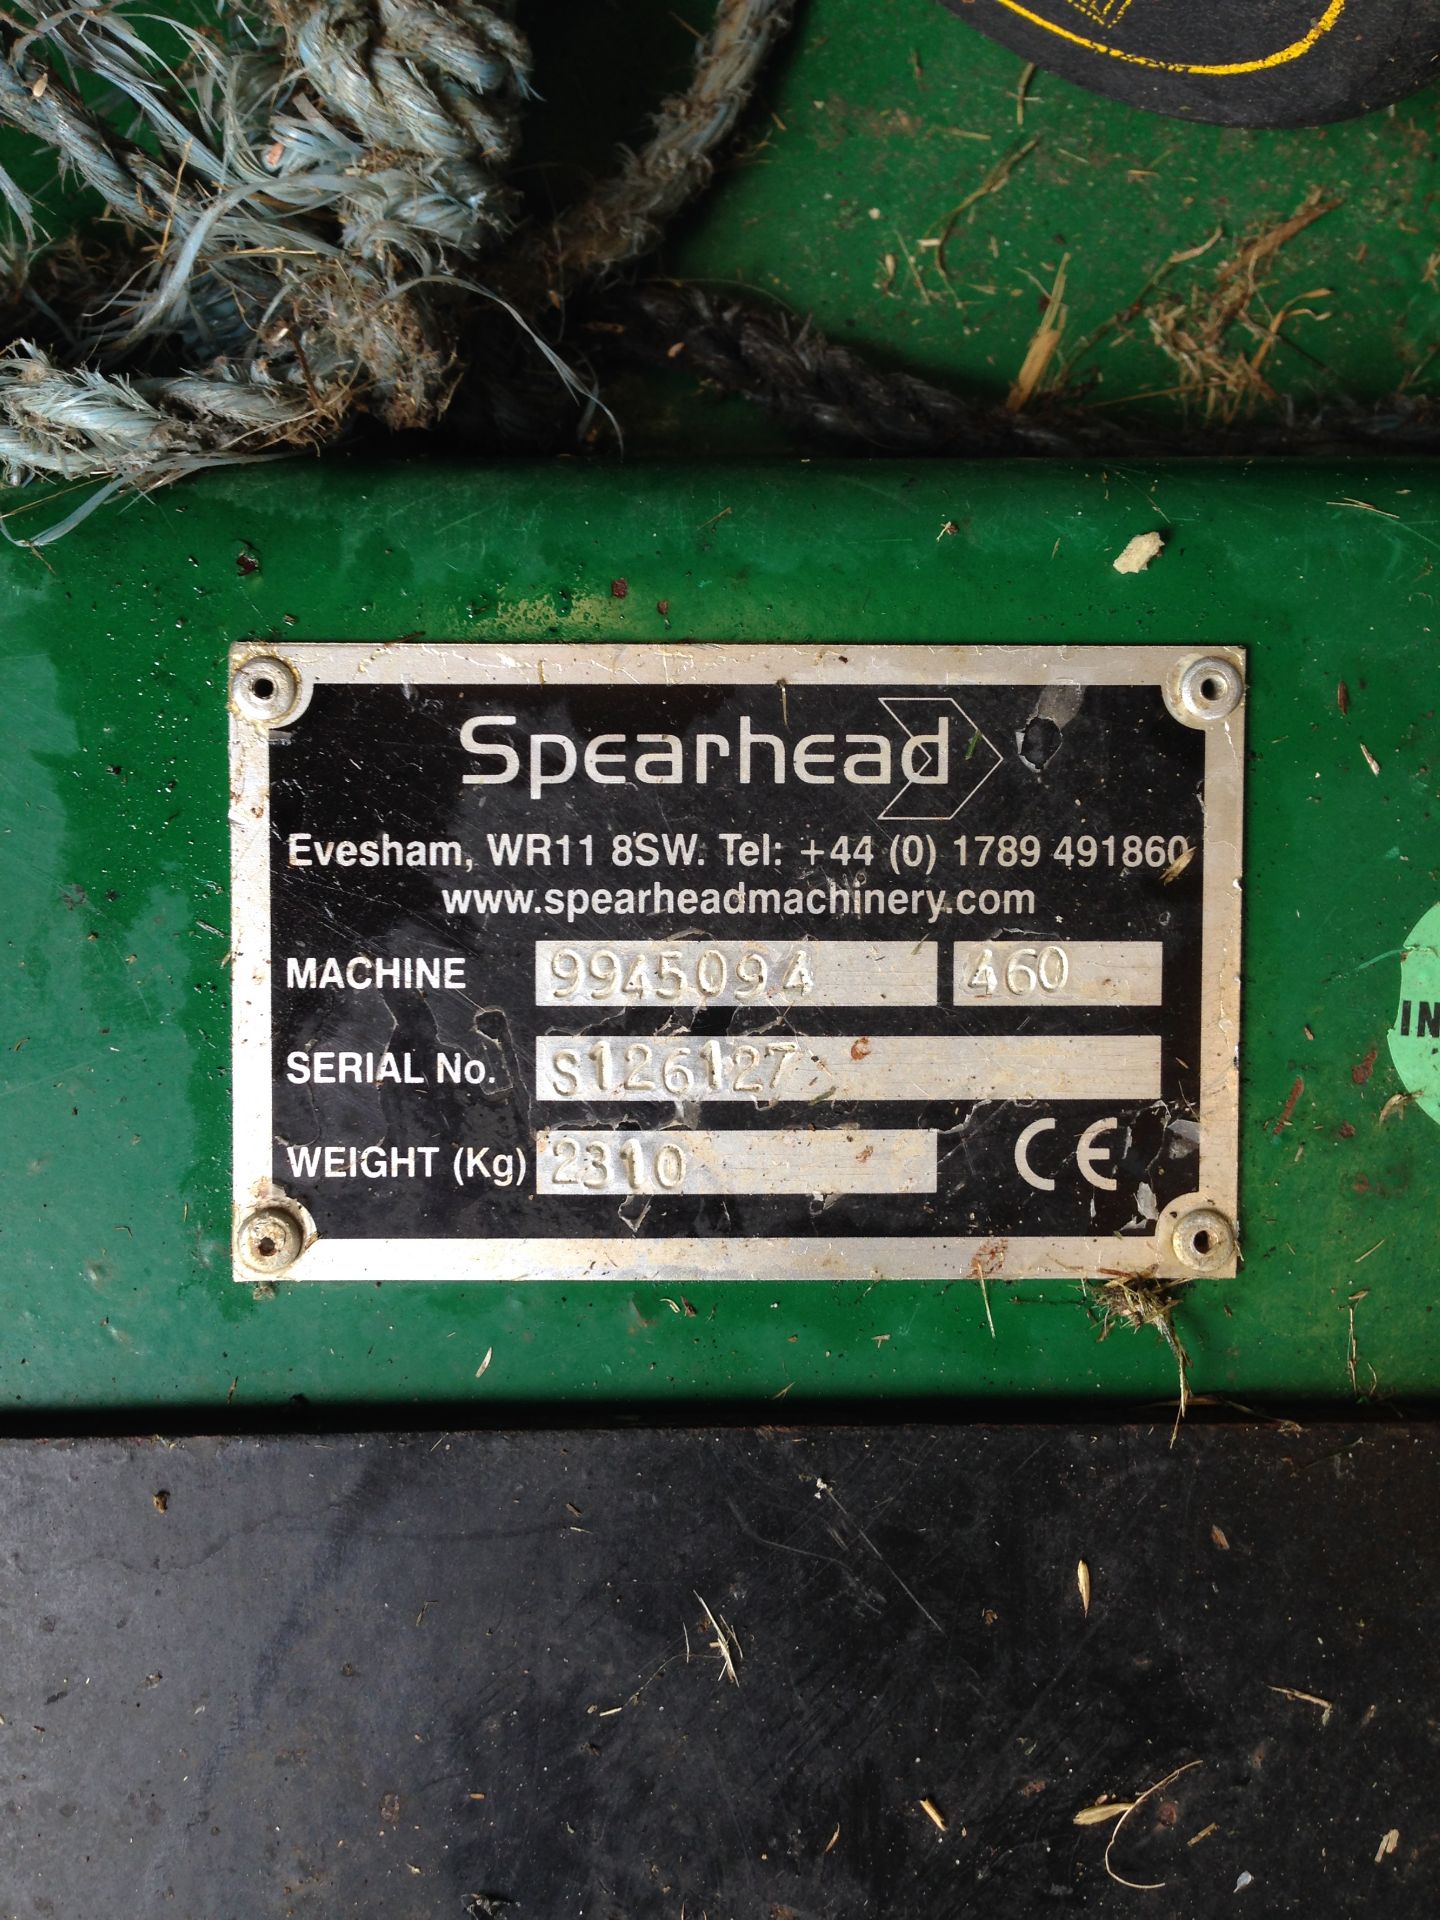 Spearhead Multicut 460 Topper, year 2012, Serial No: S126127. Location Diss, Norfolk. - Image 4 of 4